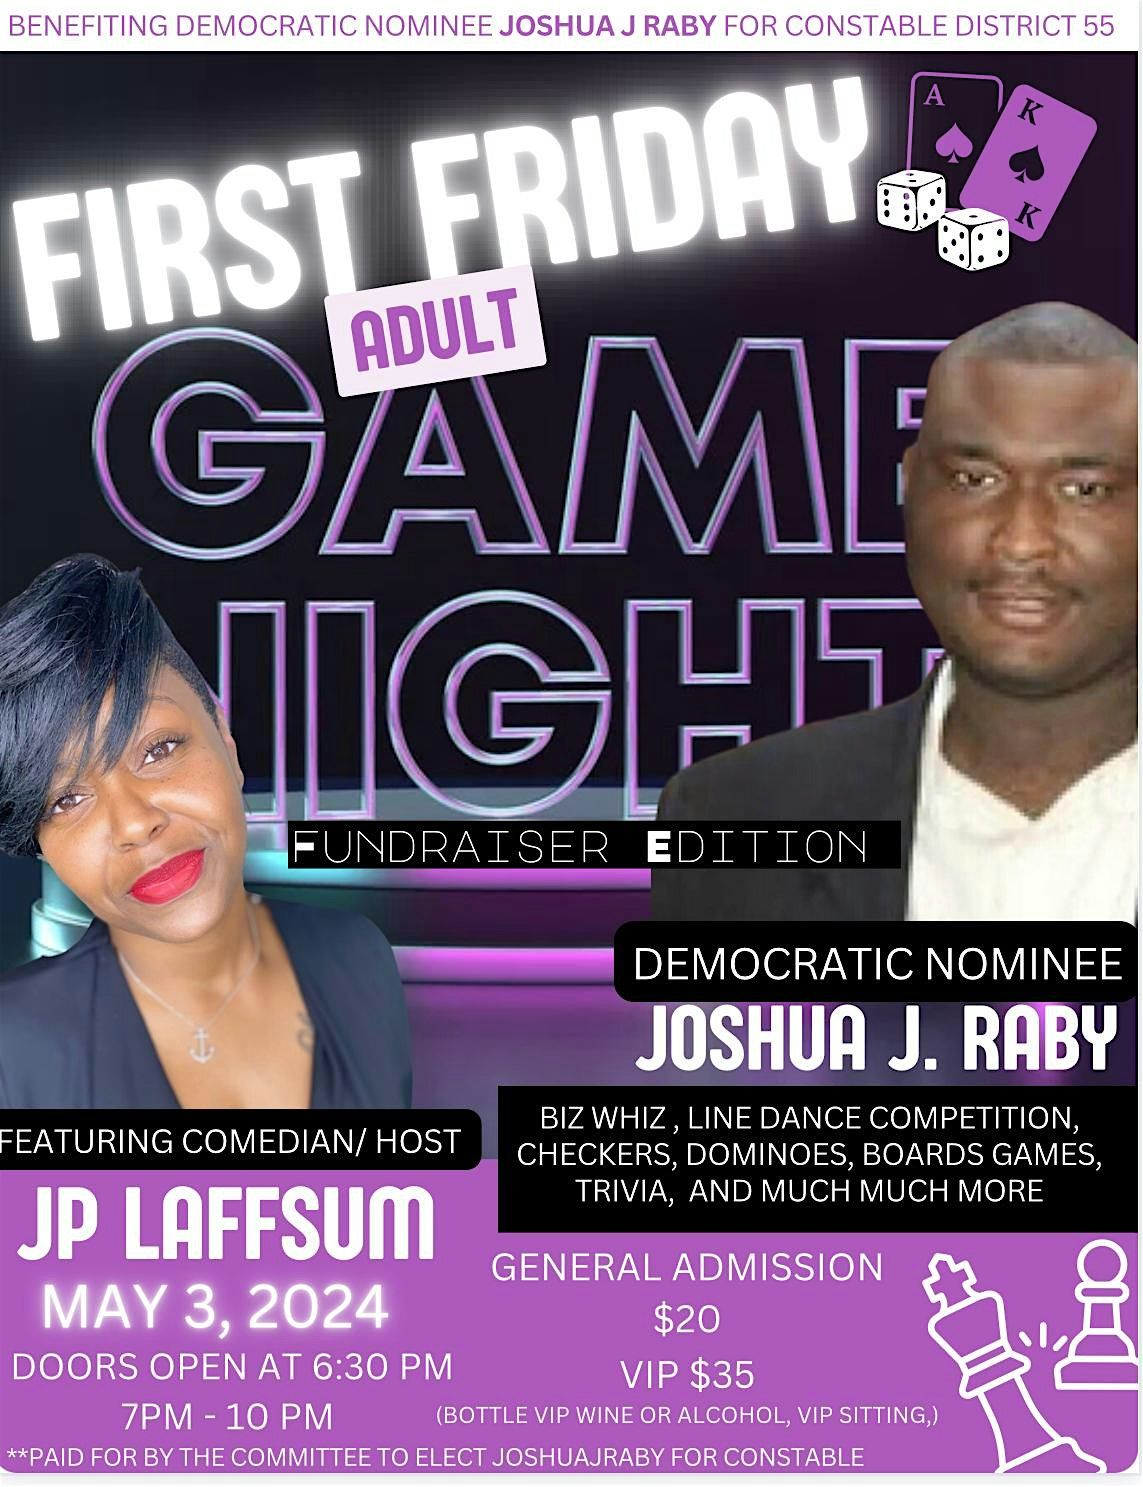 First Friday Adult Game Night Fundraiser Edition